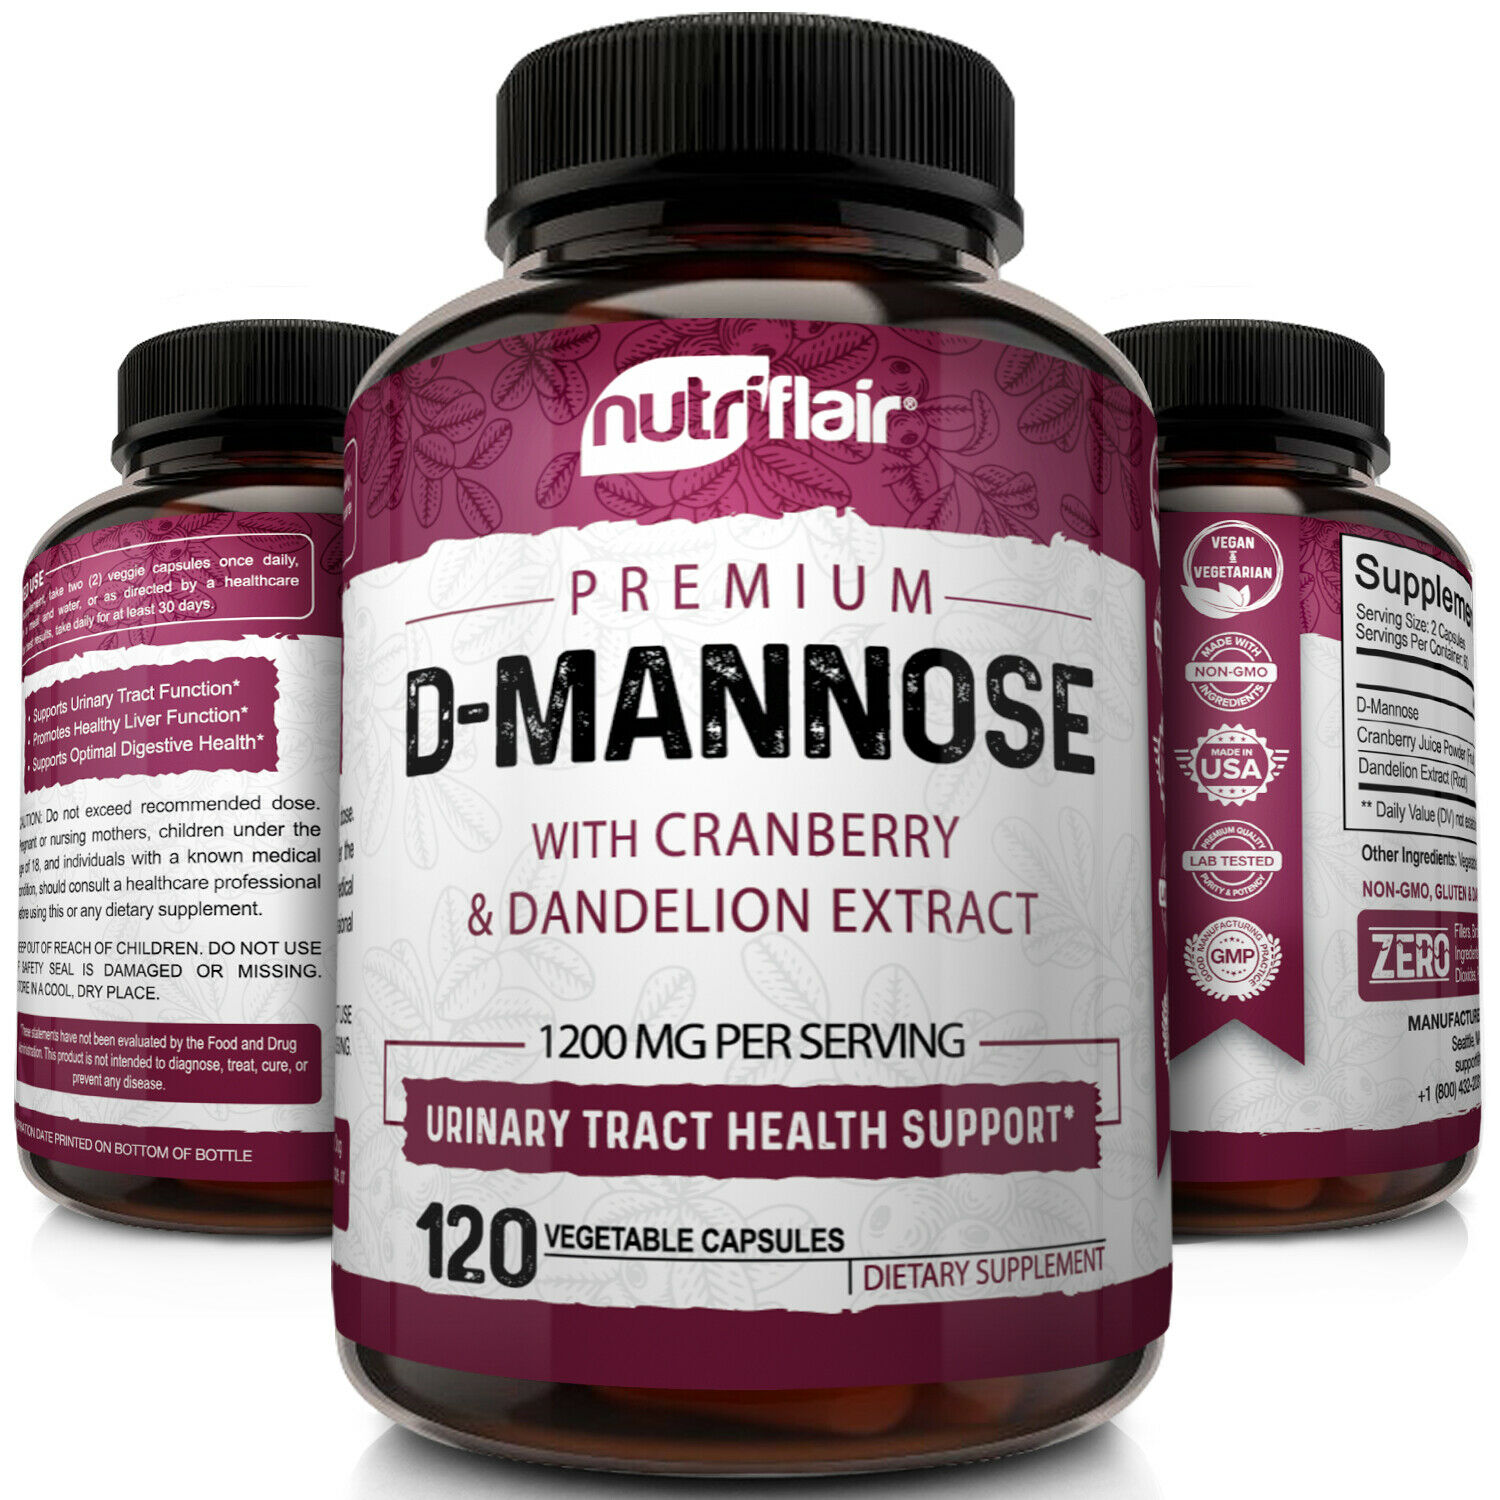 D-mannose 1200mg, 120 Capsules With Cranberry & Dandelion Extract - Uti Support